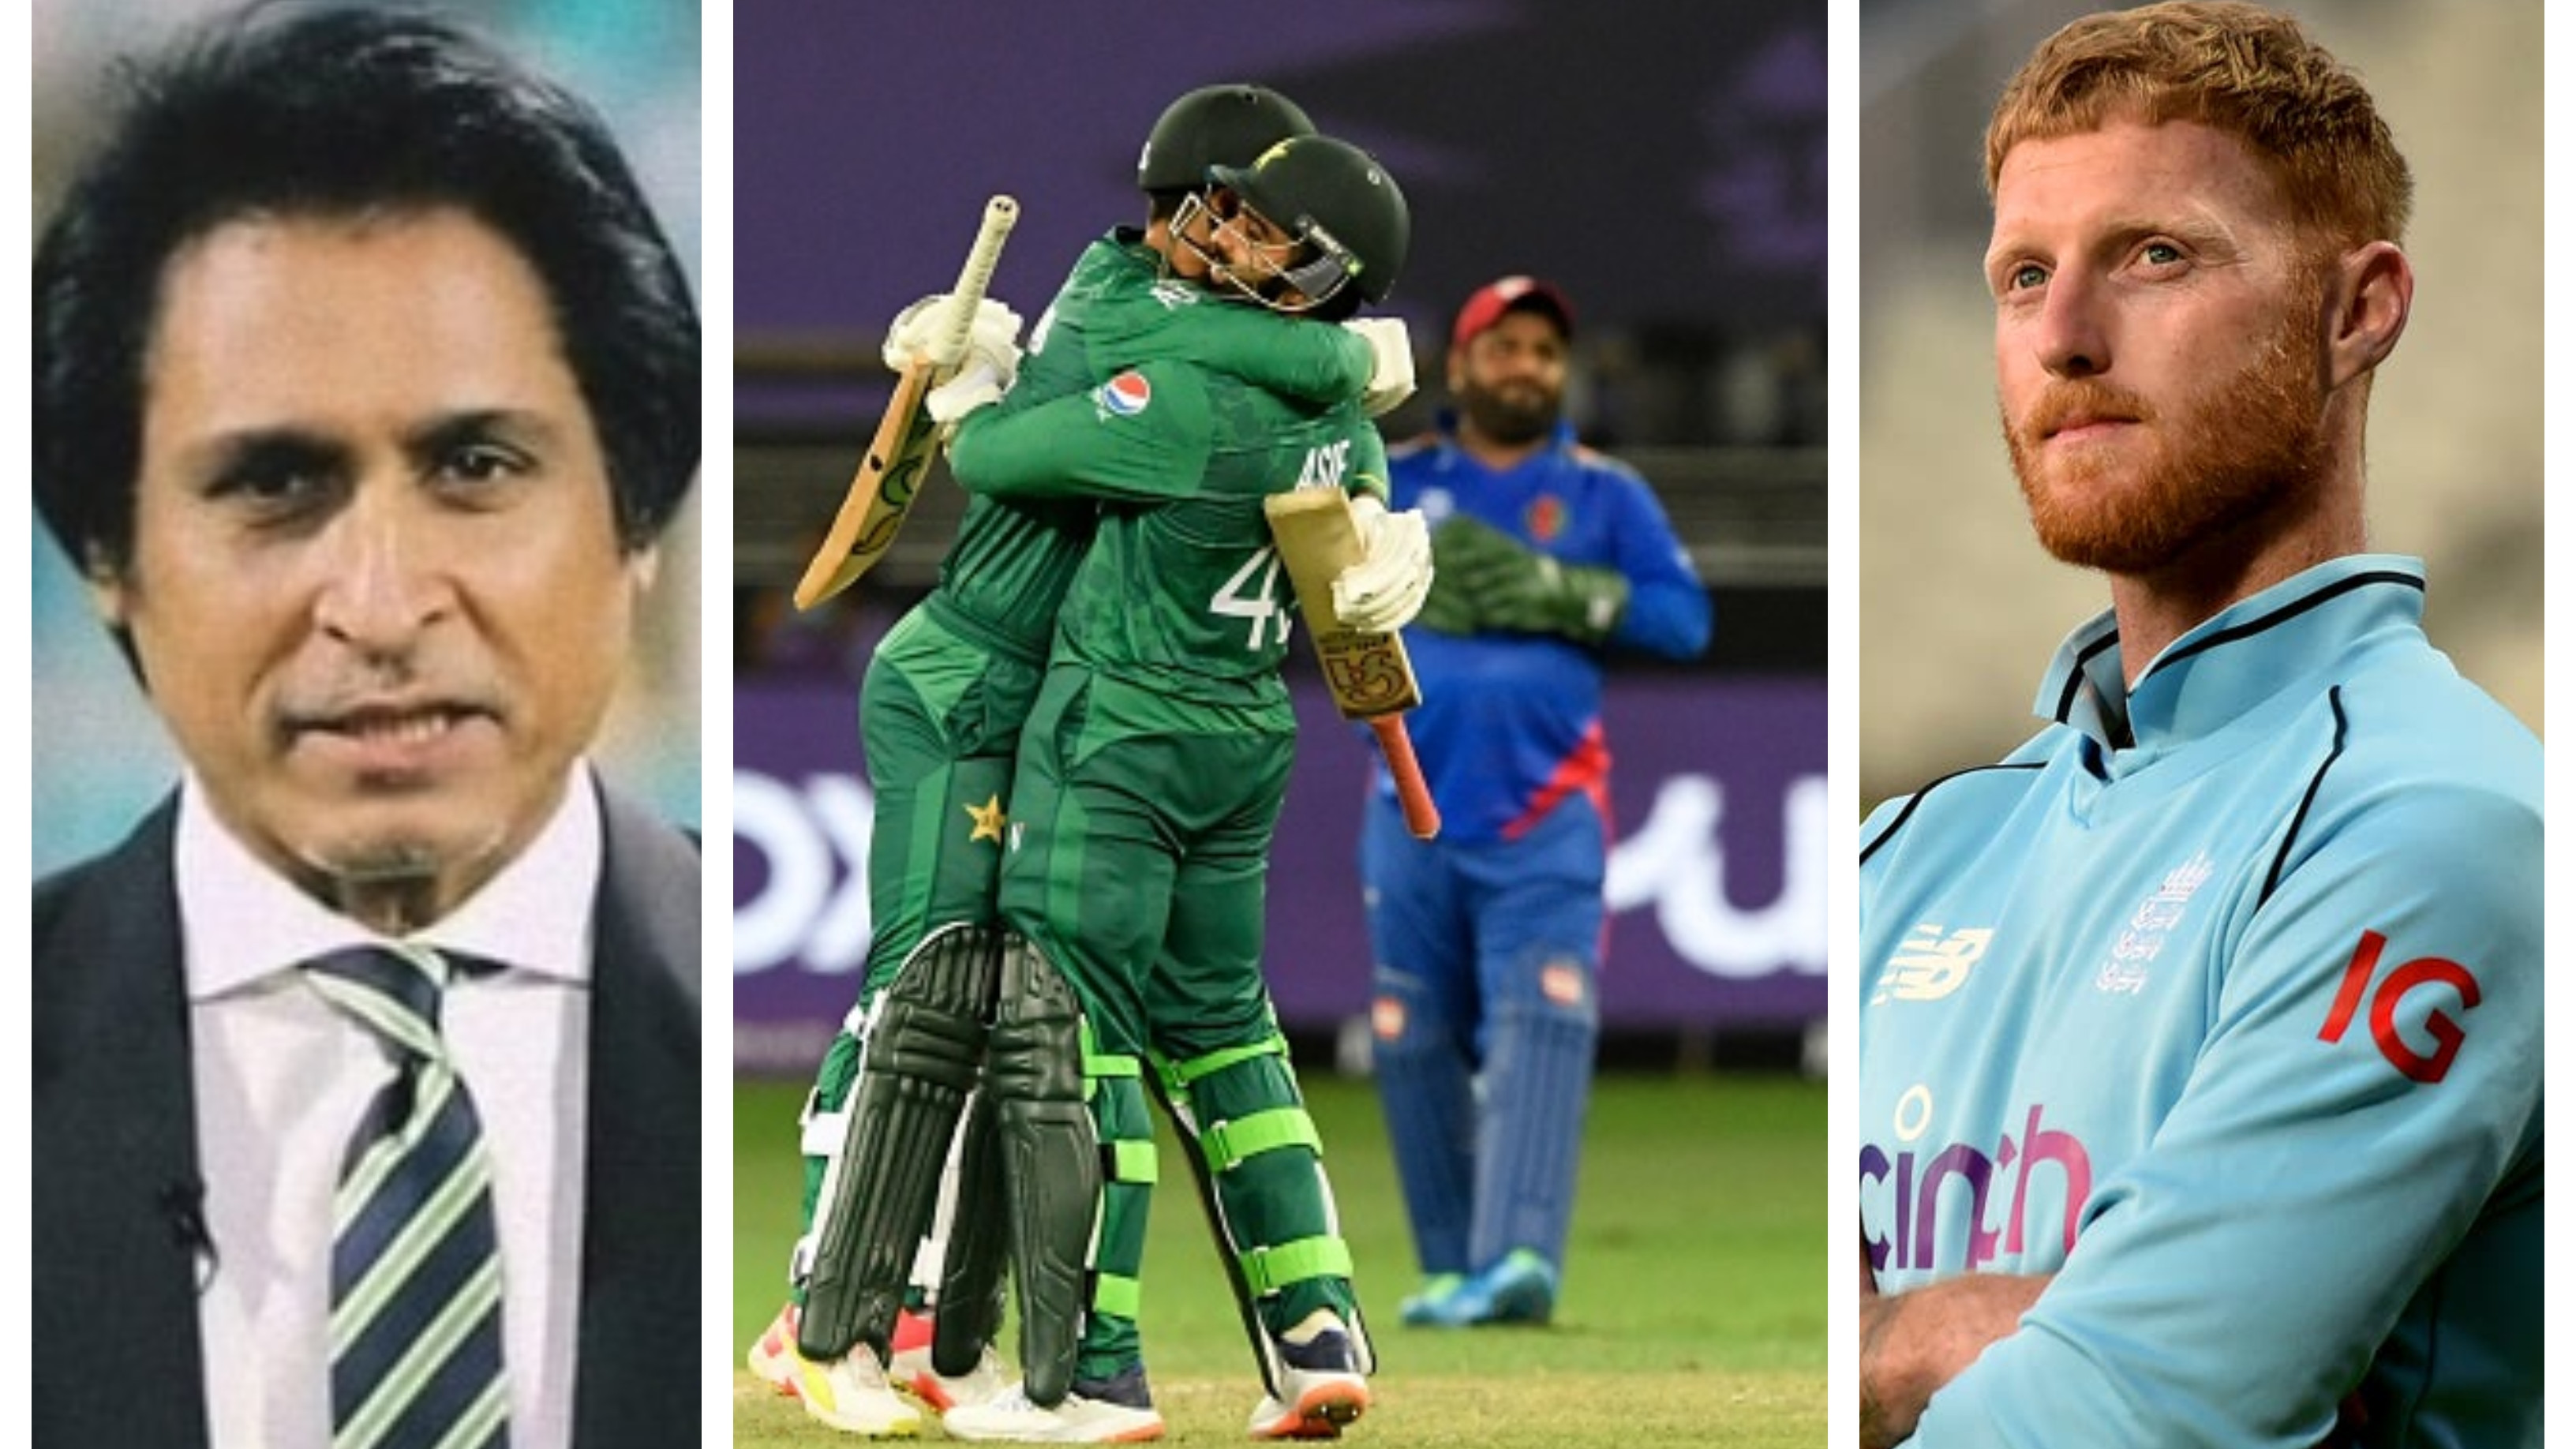 T20 World Cup 2021: Cricket fraternity reacts as Asif Ali’s late blitz guides Pakistan to thrilling win over Afghanistan